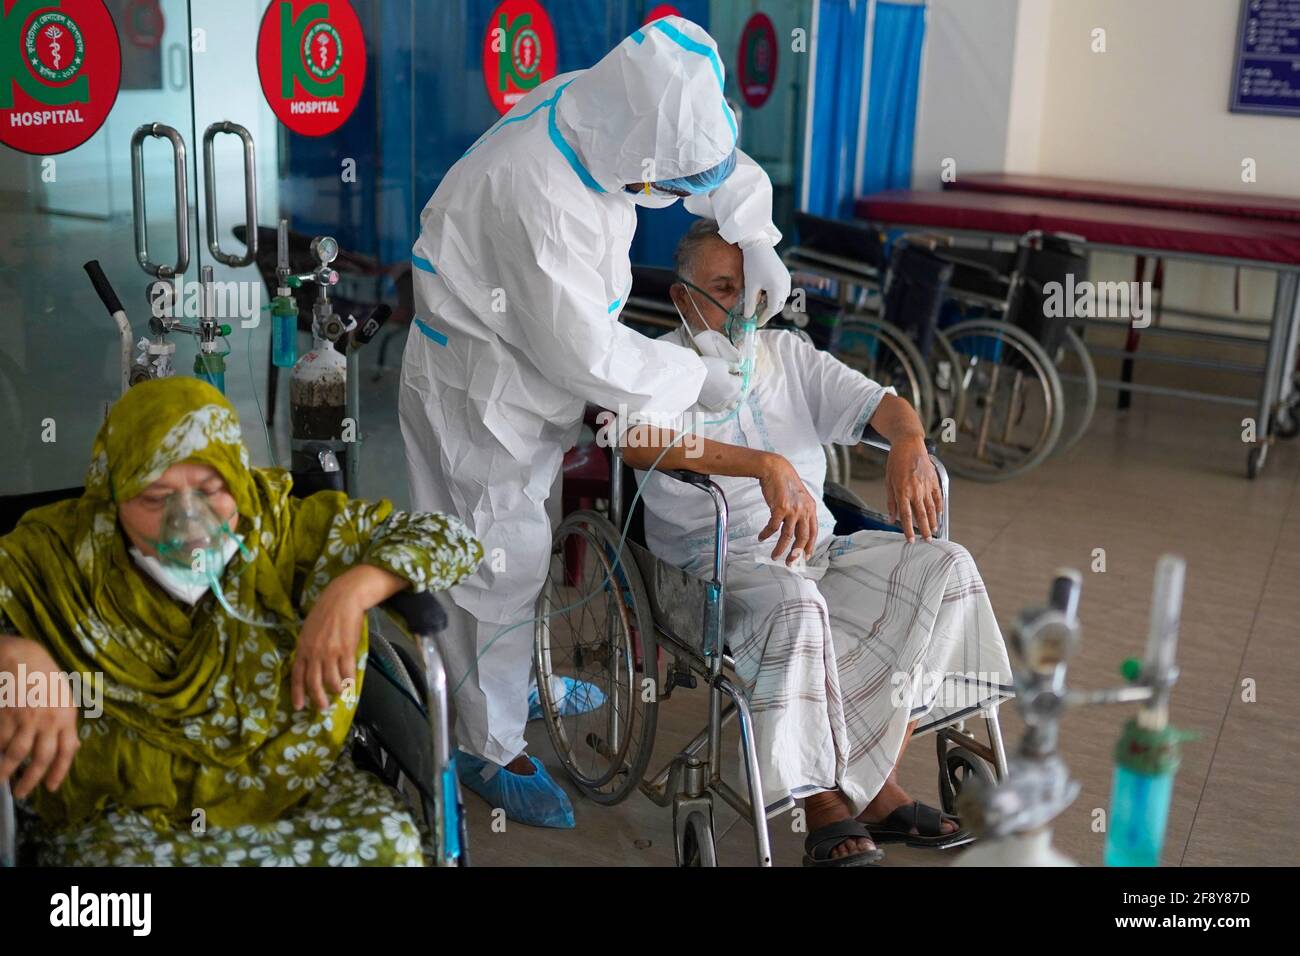 Dhaka, Bangladesh. 15th Apr, 2021. A medical worker wearing a personal protective equipment suite (PPE) adjusts the oxygen mask for an intubated COVID-19 patient at Kurmitola General Hospital in Dhaka.Death toll from the coronavirus infection has surpassed the grim 10,000 mark in Bangladesh as 94 more people have died of the deadly virus in the past 24 hours. (Photo by Sultan Mahmud Mukut/SOPA Images/Sipa USA) Credit: Sipa USA/Alamy Live News Stock Photo